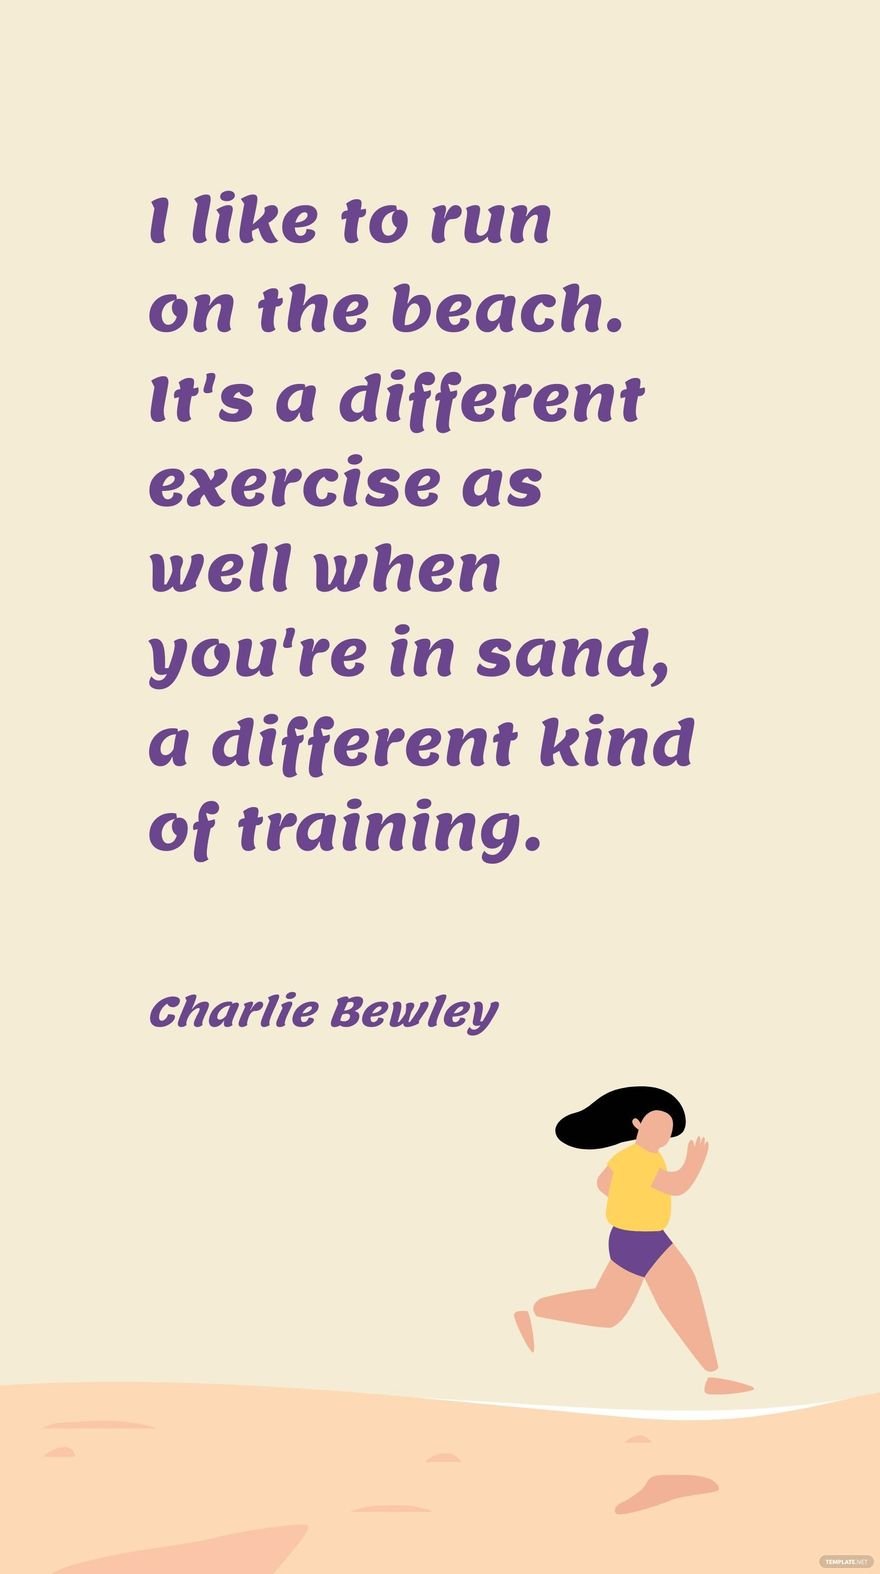 Free Charlie Bewley - I like to run on the beach. It's a different exercise as well when you're in sand, a different kind of training.